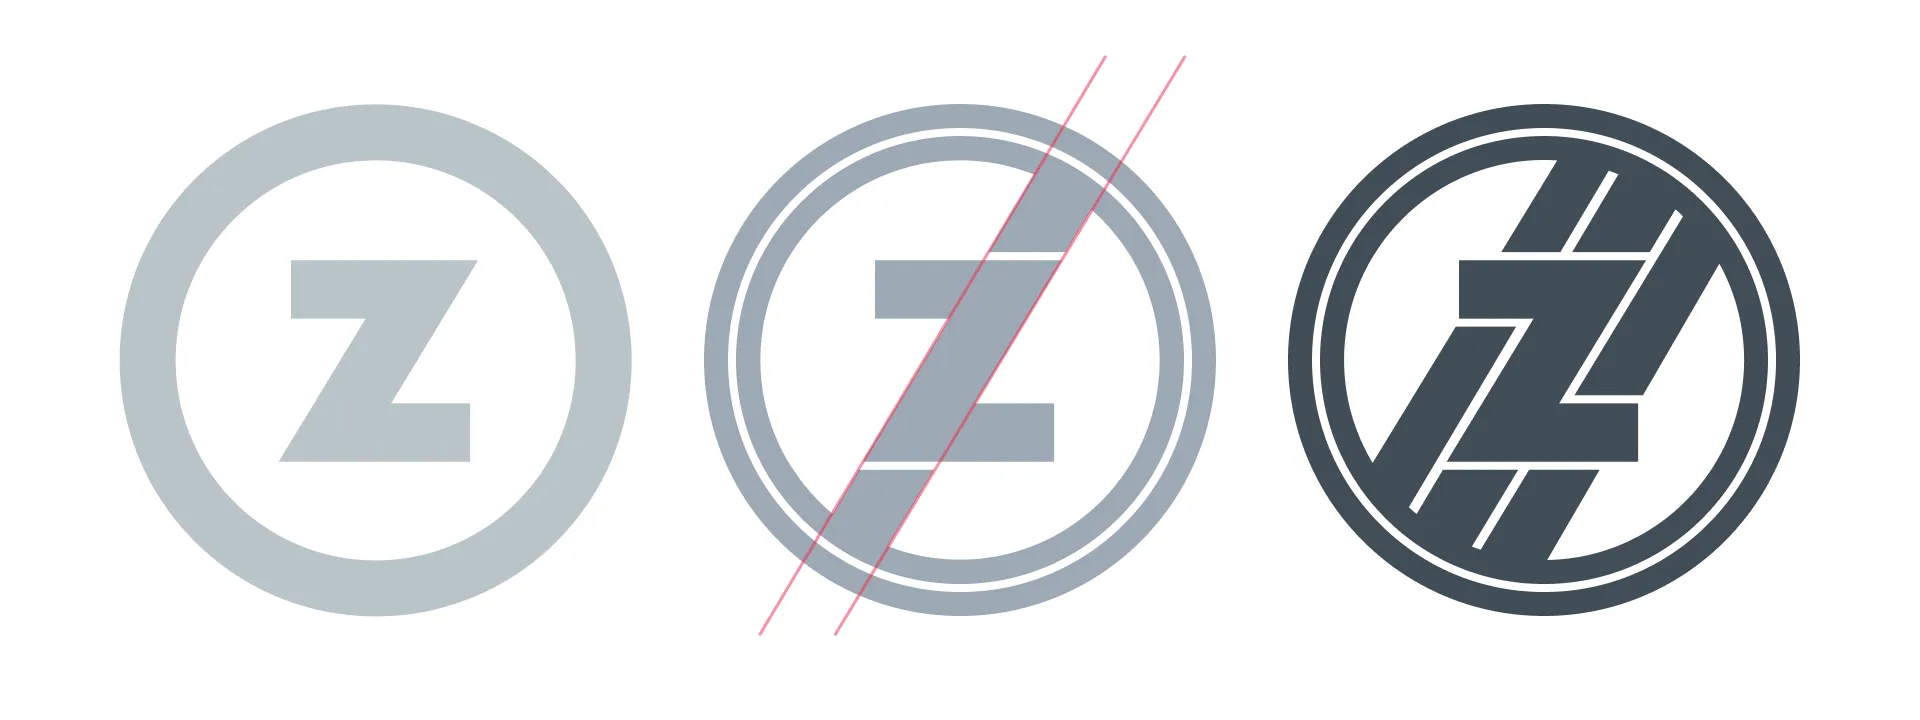 Maintaining a square/circular frame for the Z while emphasizing the dynamic lines